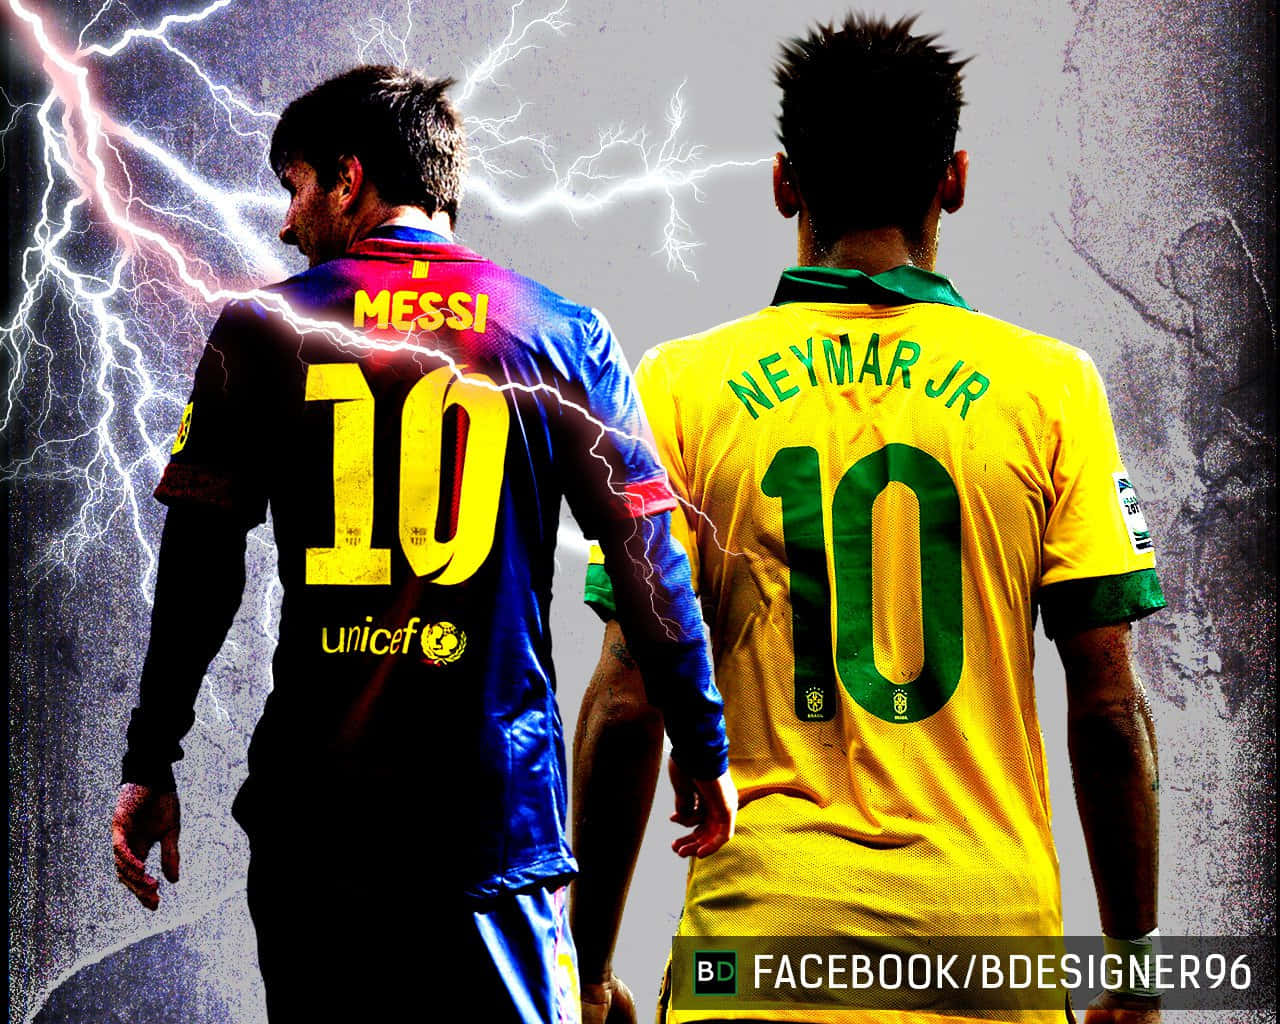 The Two Football Stars, Lionel Messi and Neymar Jr. Wallpaper